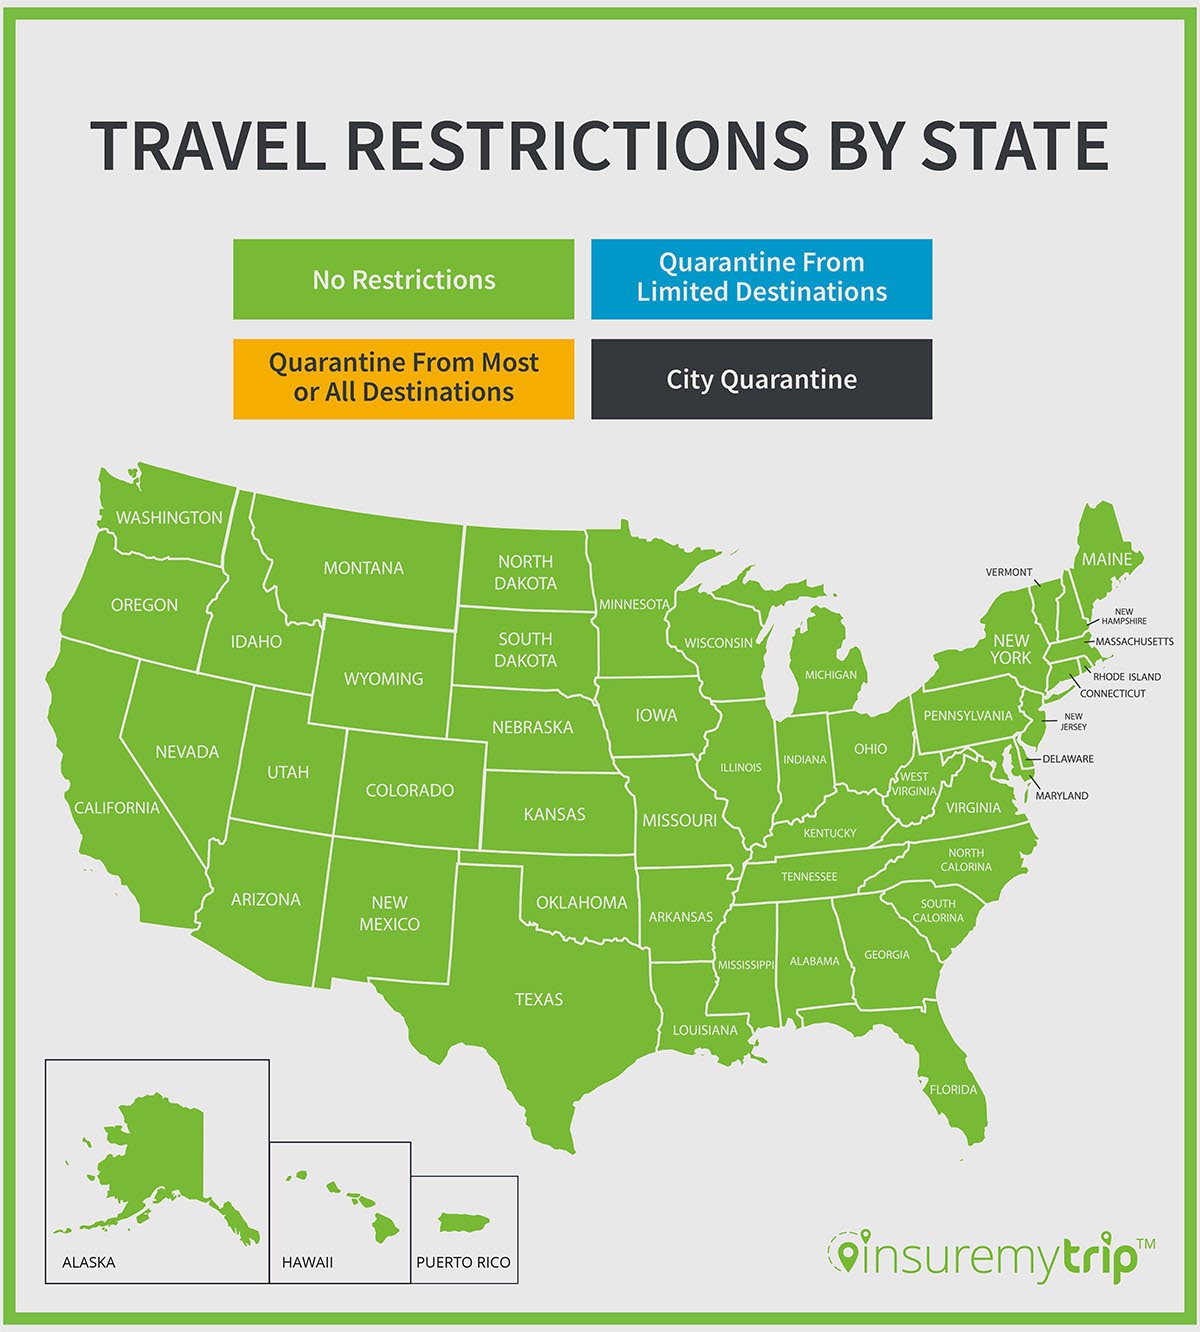 COVID-19 Pandemic Travel Restrictions by US State